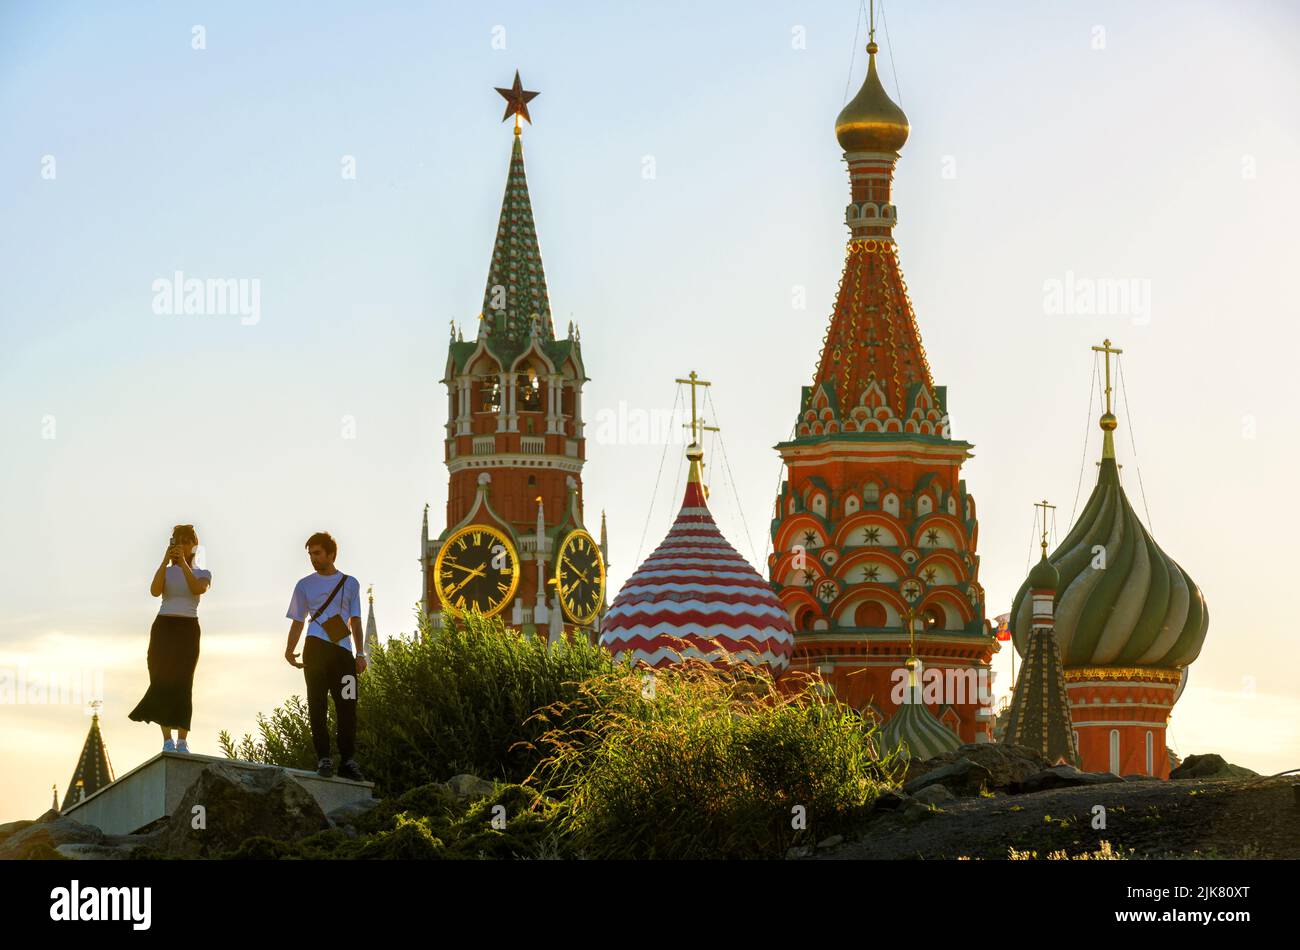 Moscow - Jun 28, 2022: People walk in landscaped Zaryadye Park near Kremlin and St Basil's Cathedral, Moscow, Russia. This place is tourist attraction Stock Photo